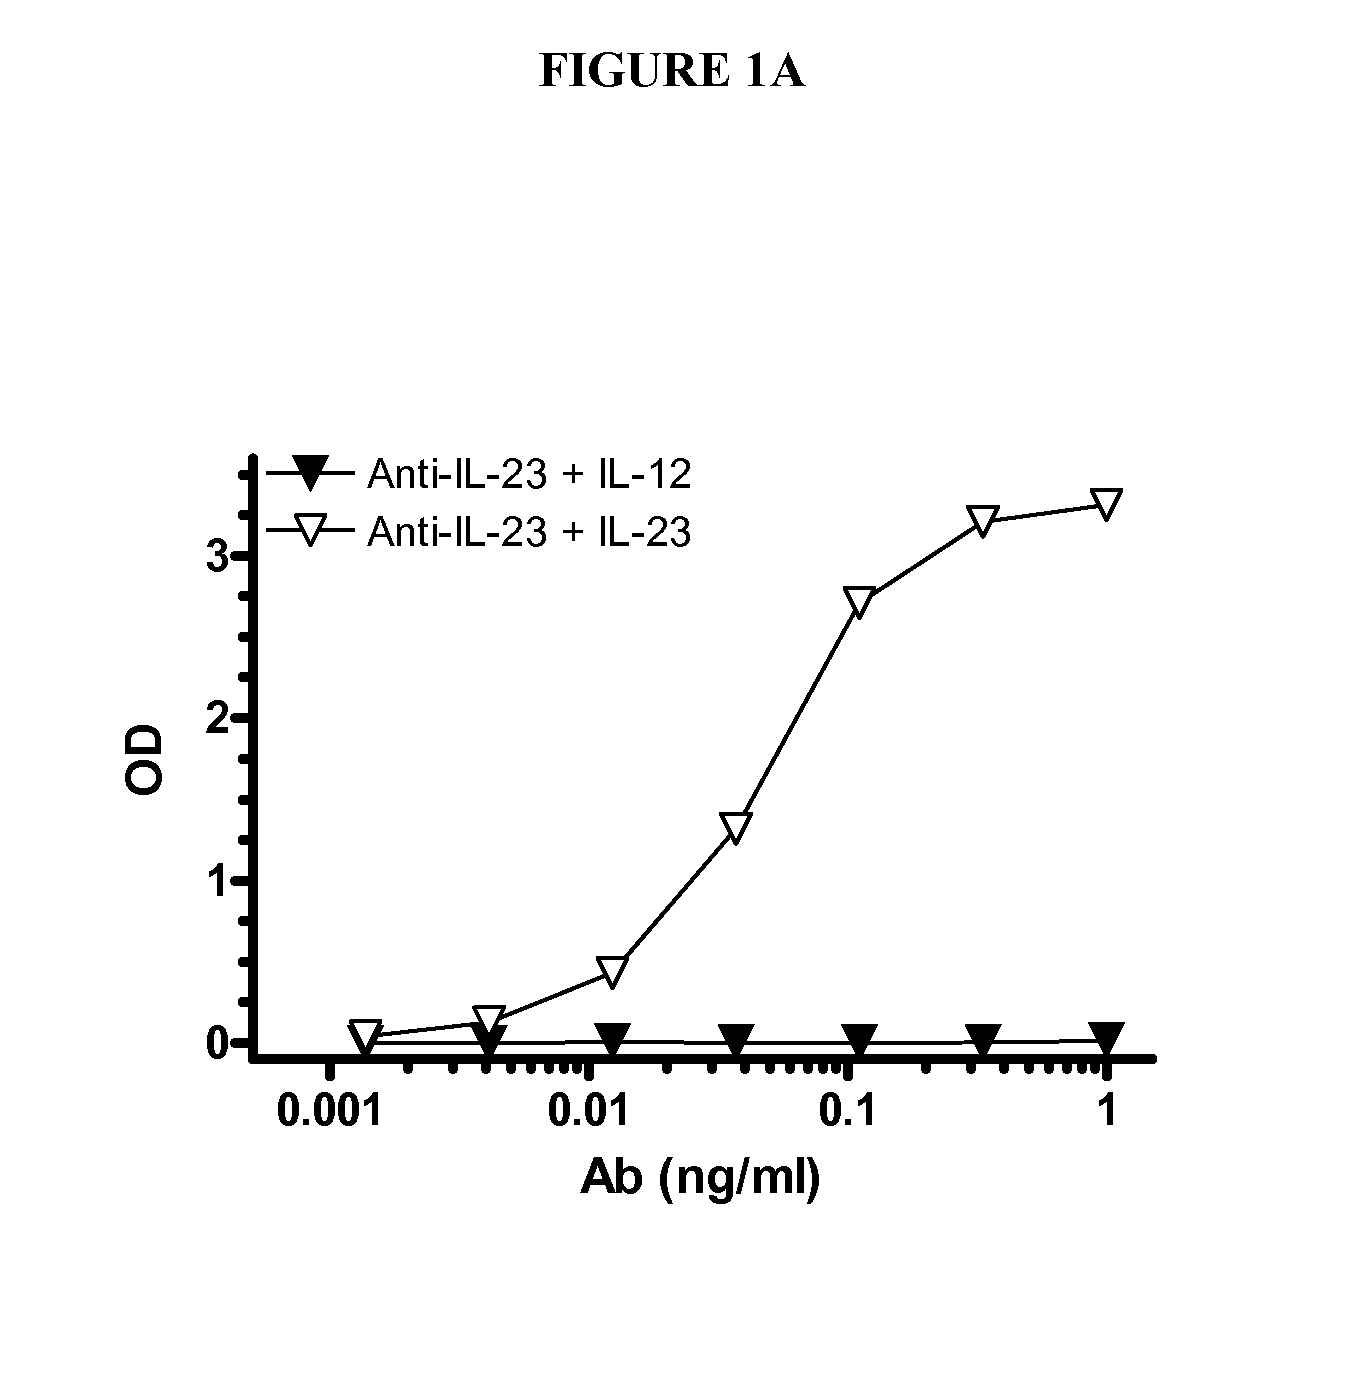 IL-23p40 Specific Immunoglobulin Derived Proteins, Compositions, Epitopes, Methods and Uses